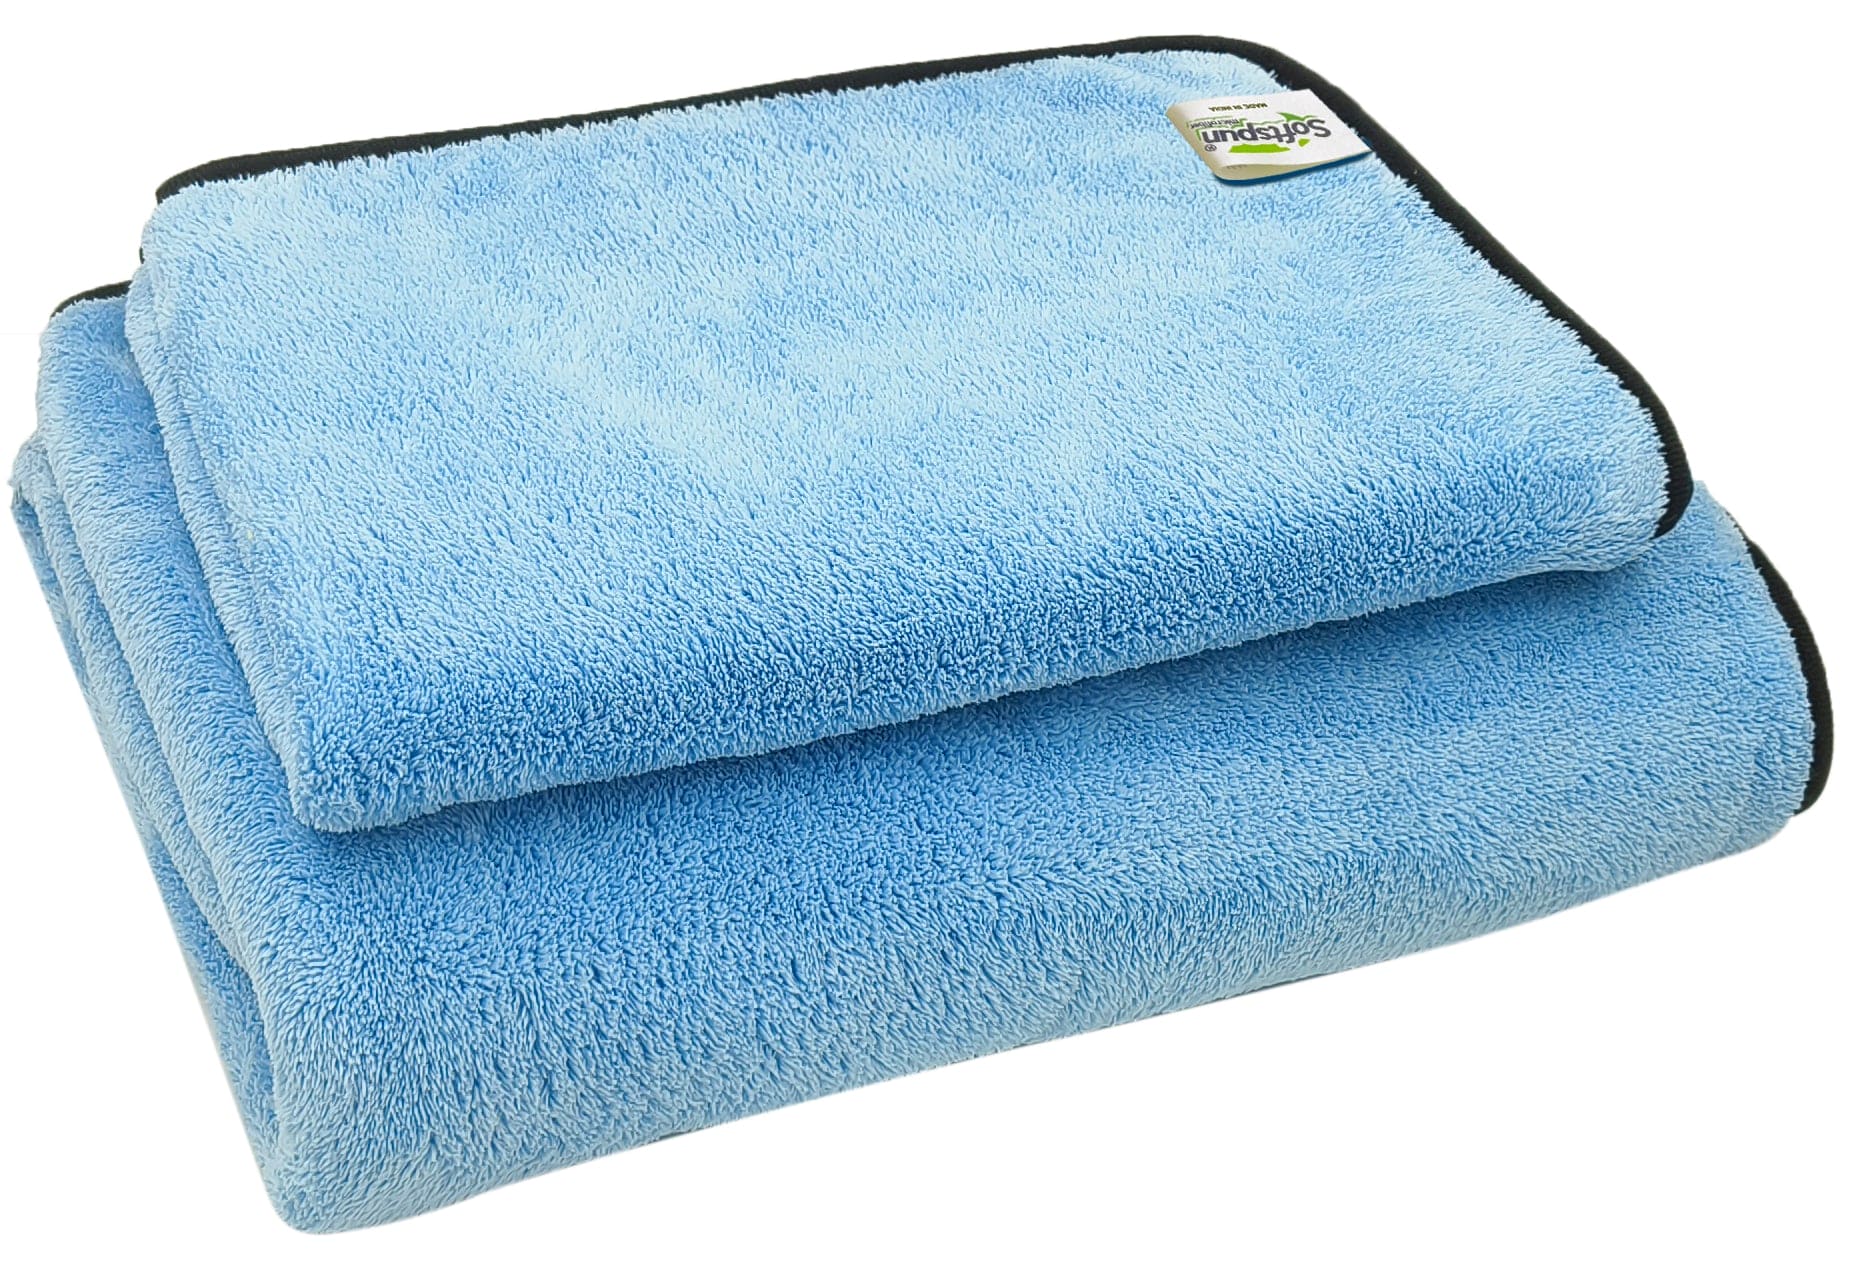 SOFTSPUN Microfiber Bath Towel 2 pc 60x120cm & 40X60cm 280GSM  Ultra Absorbent Super Soft & Comfortable Quick Drying for Men & Women Daily Use Pack of 1 Extra Large Size Unisex.